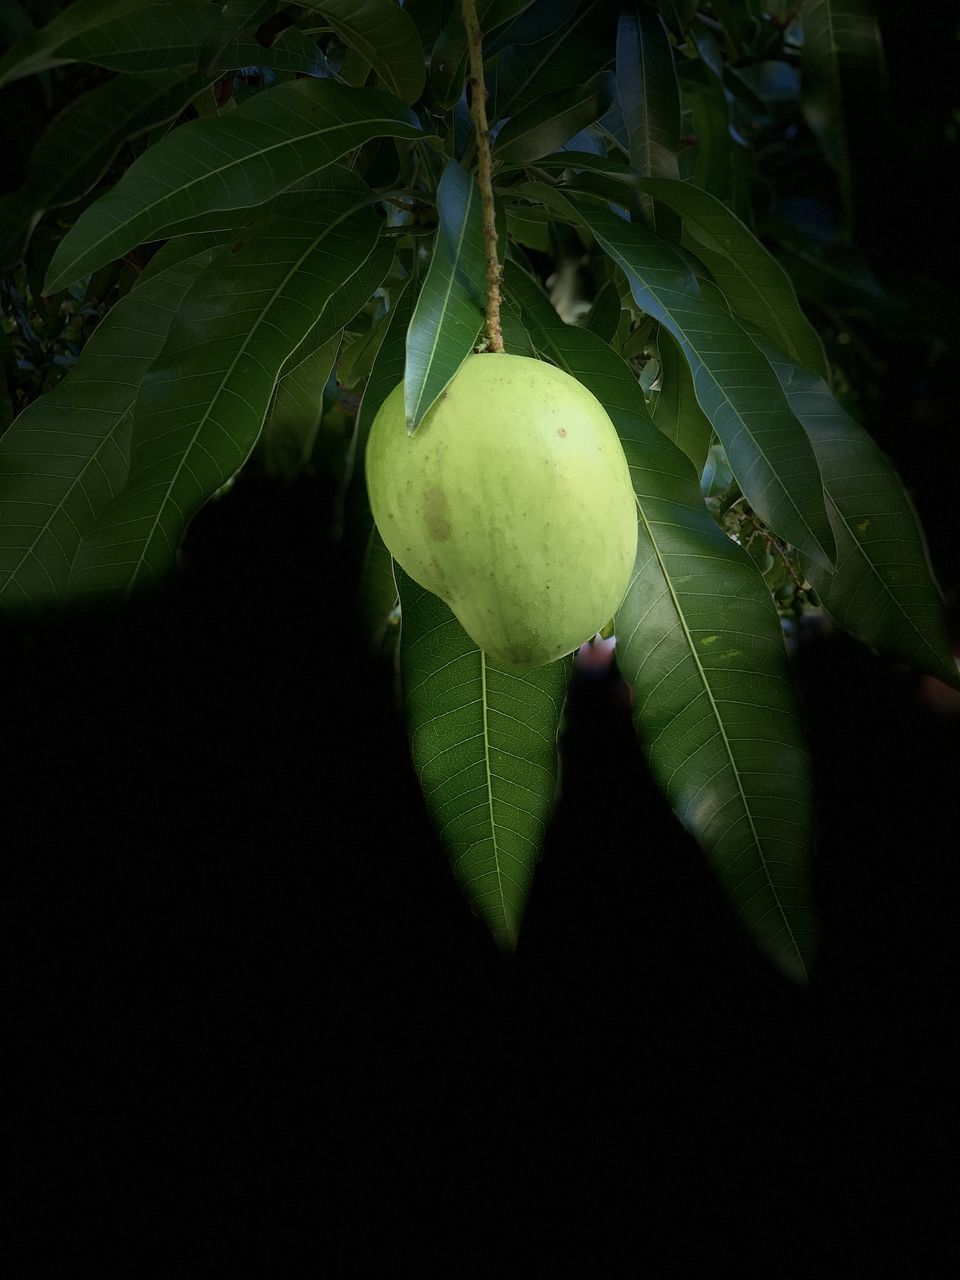 CLOSE-UP OF FRUIT GROWING ON PLANT